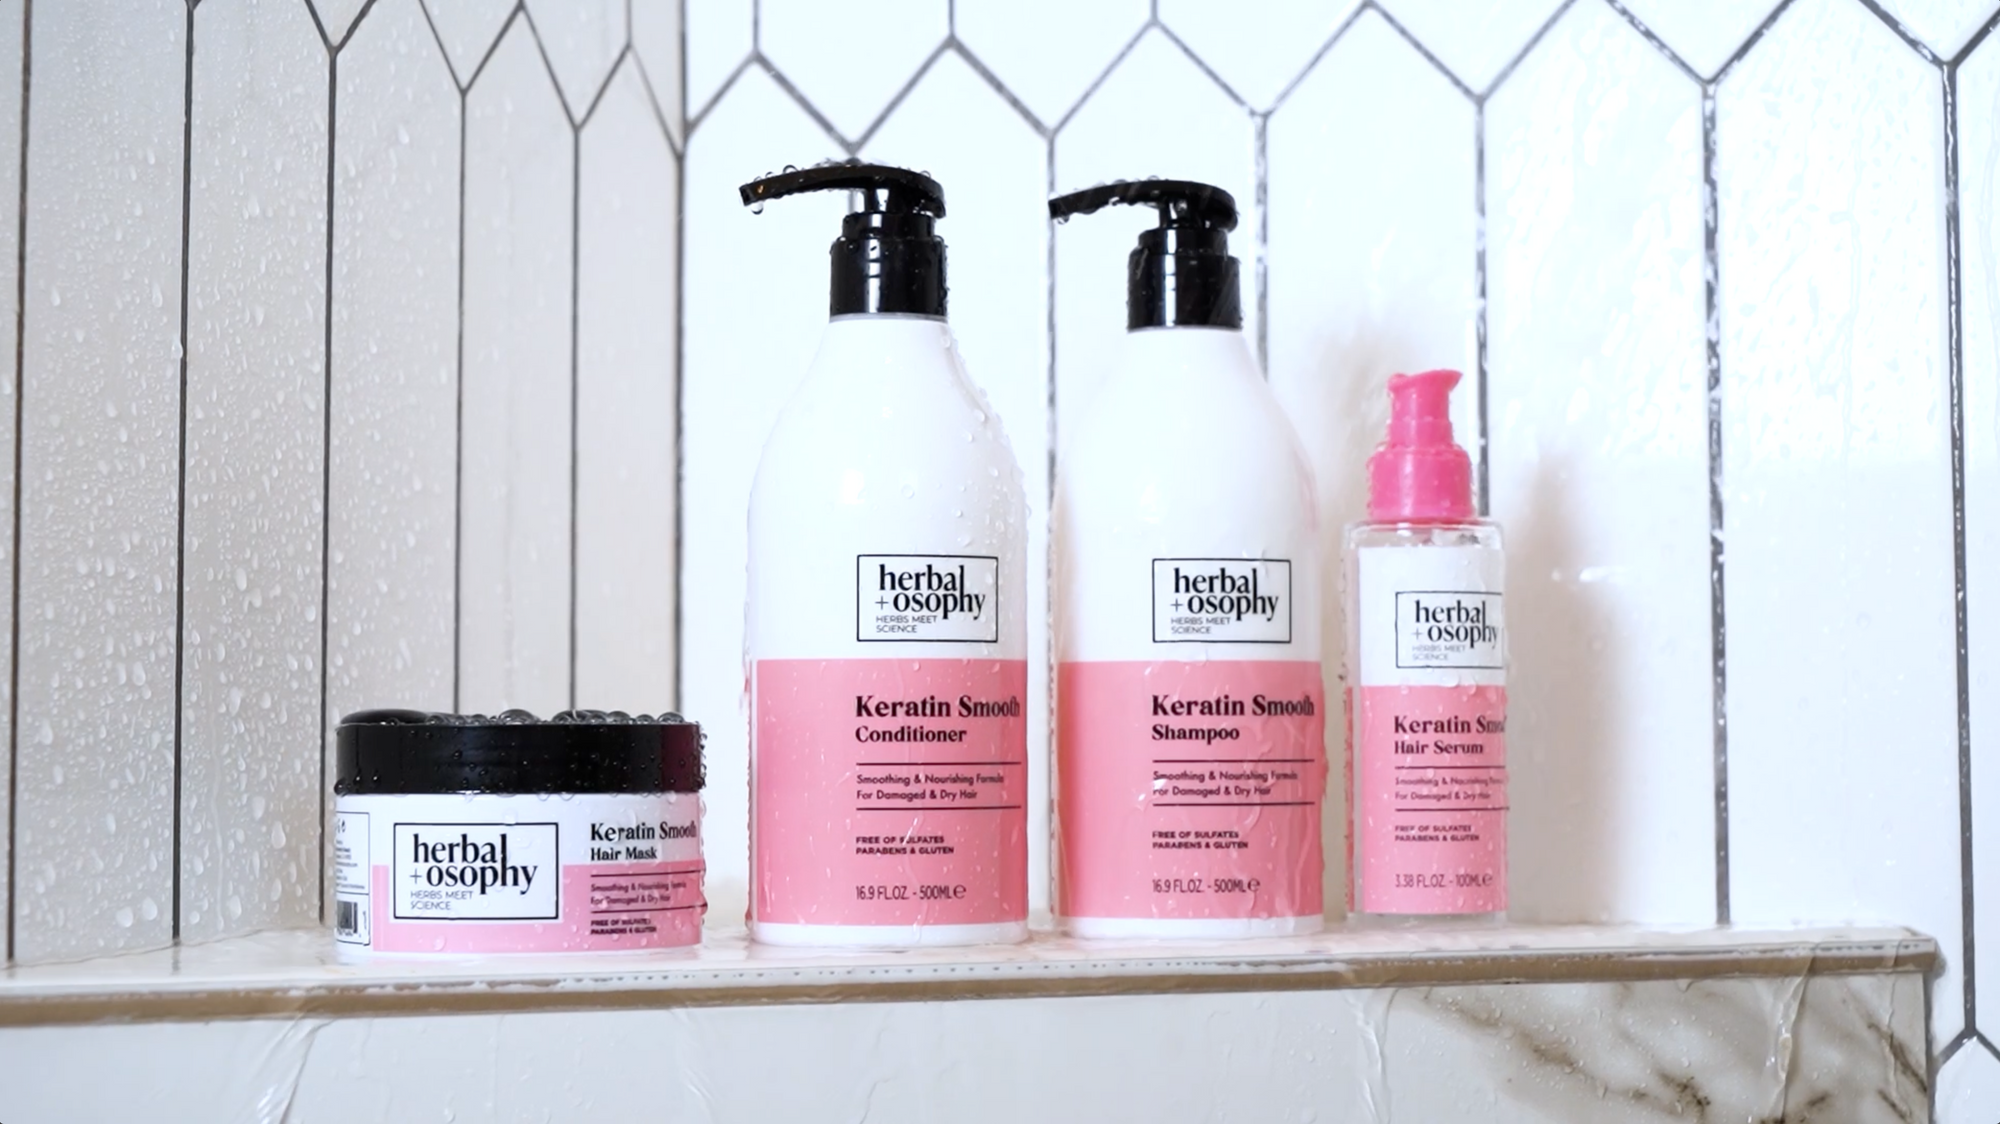 Herbalosophy Keratin Smooth series video showing the products and describing benefits